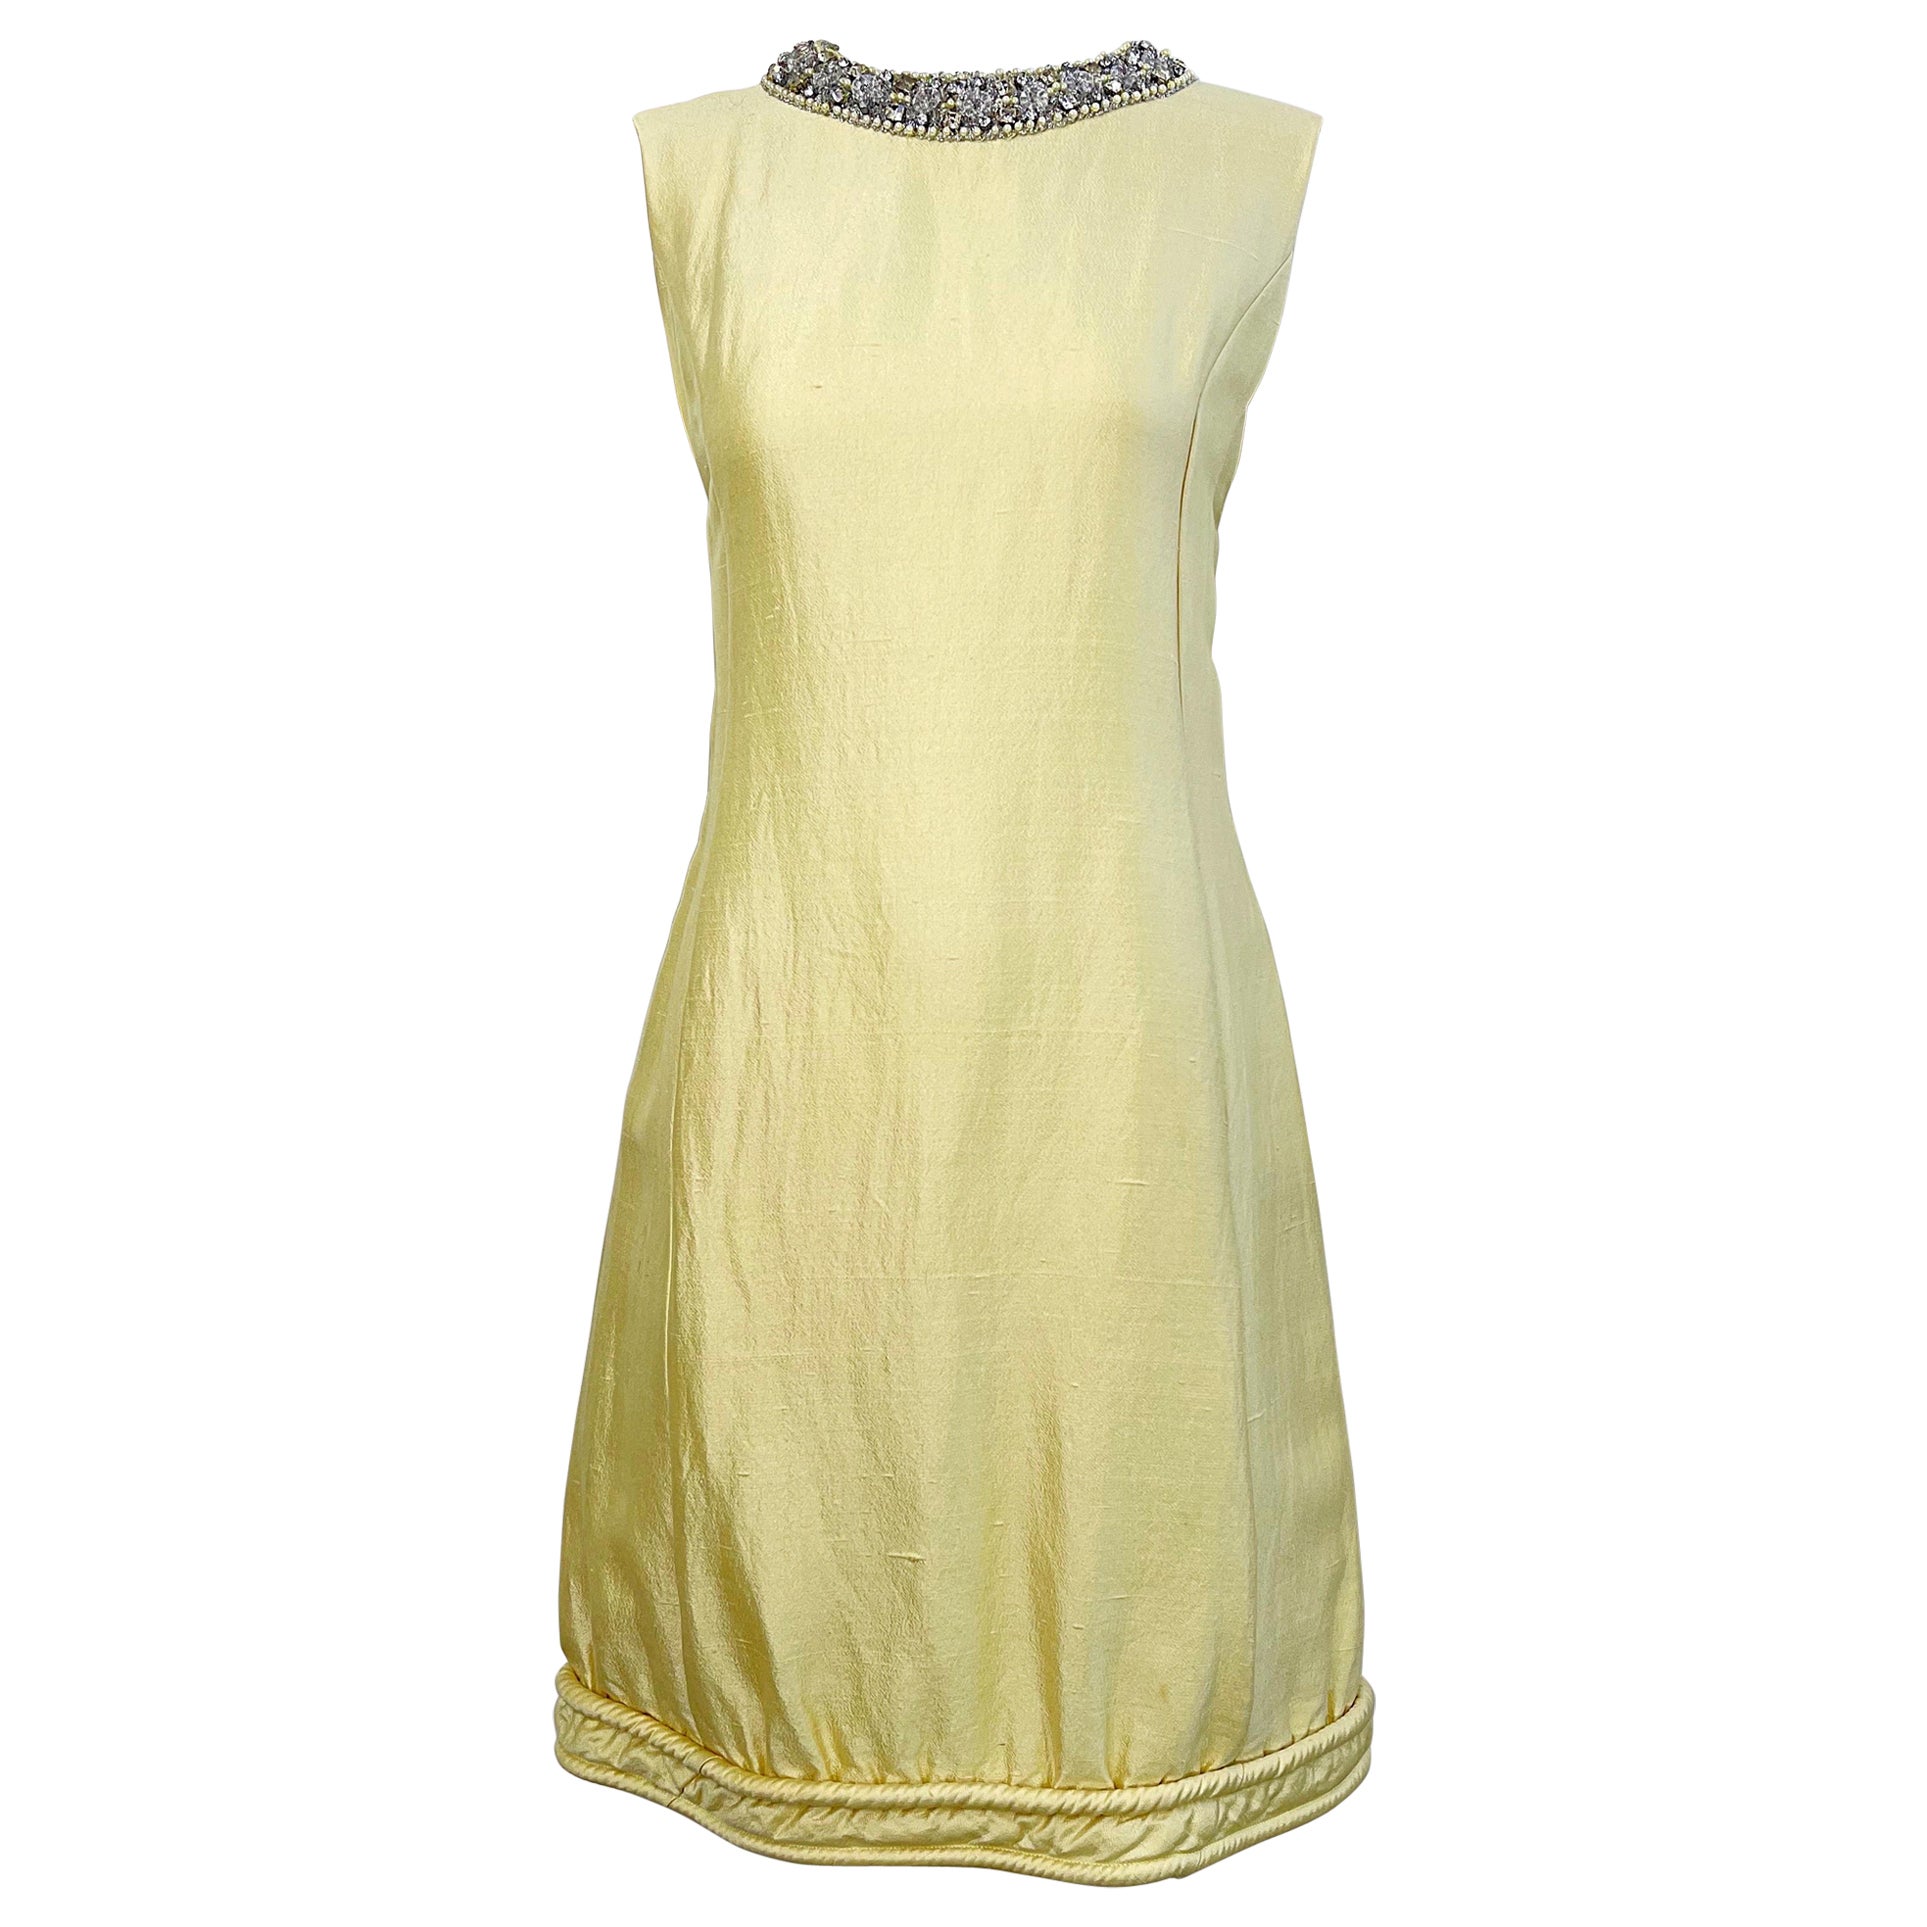 Chic 1960s Pale Yellow Silk Shantung Rhinestone Beaded Vintage 60s Shift Dress For Sale